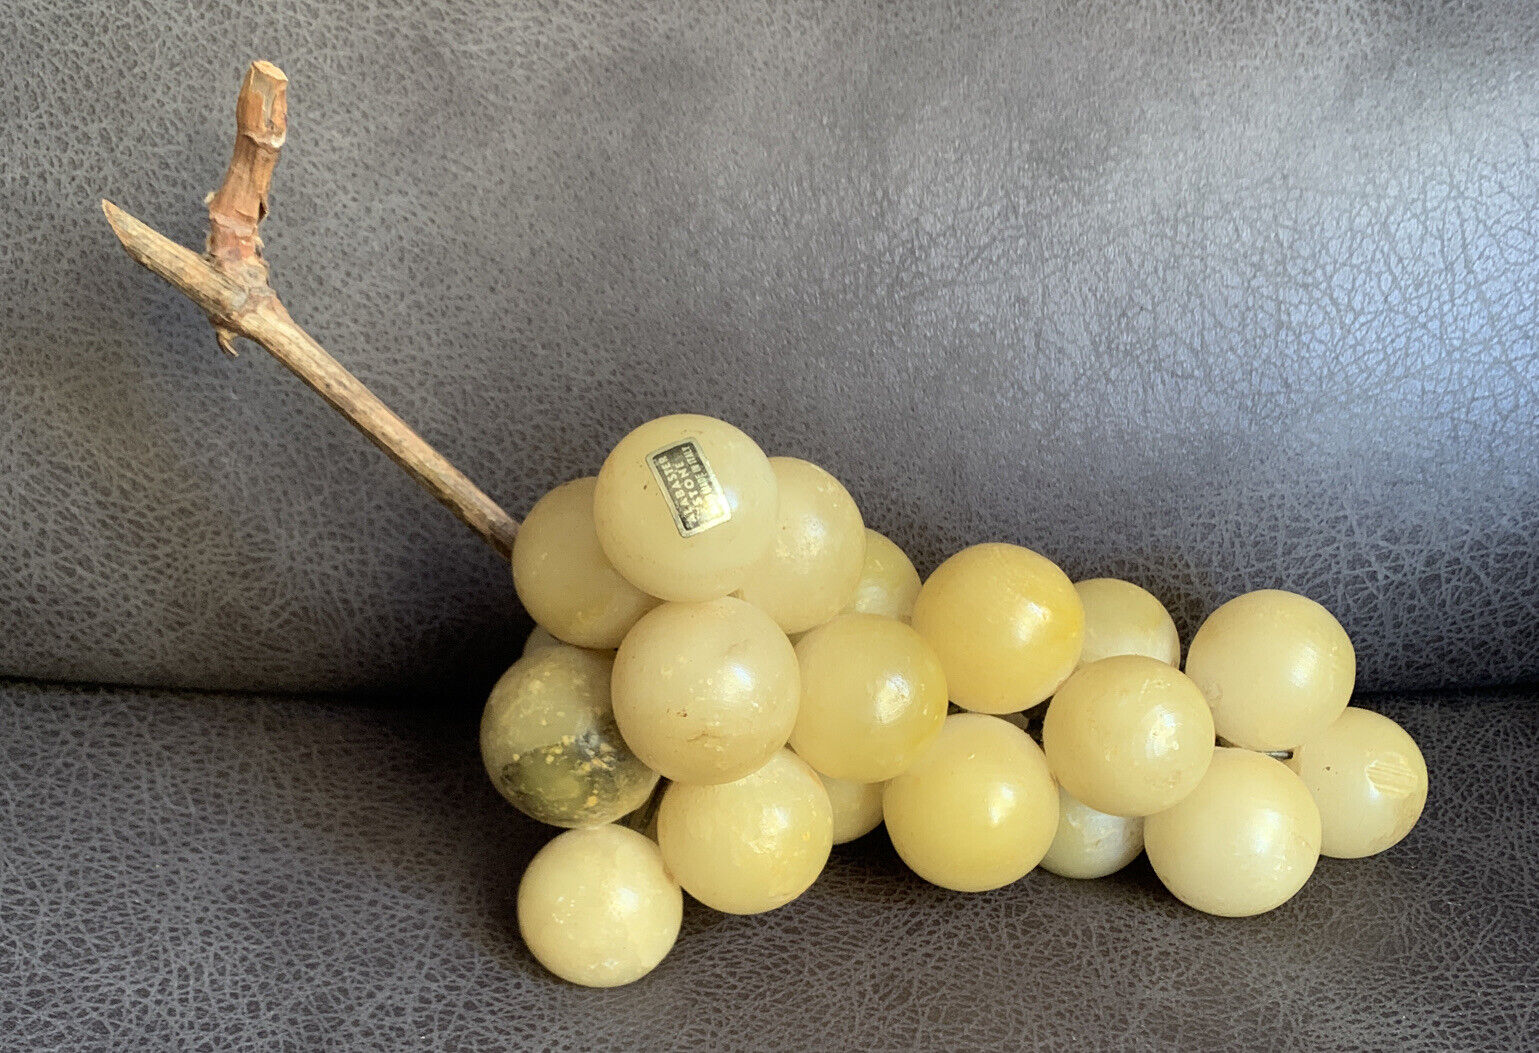 Vintage Handmade Italian Alabaster Stone Grapes 10.5” with Wooden Stem 4”